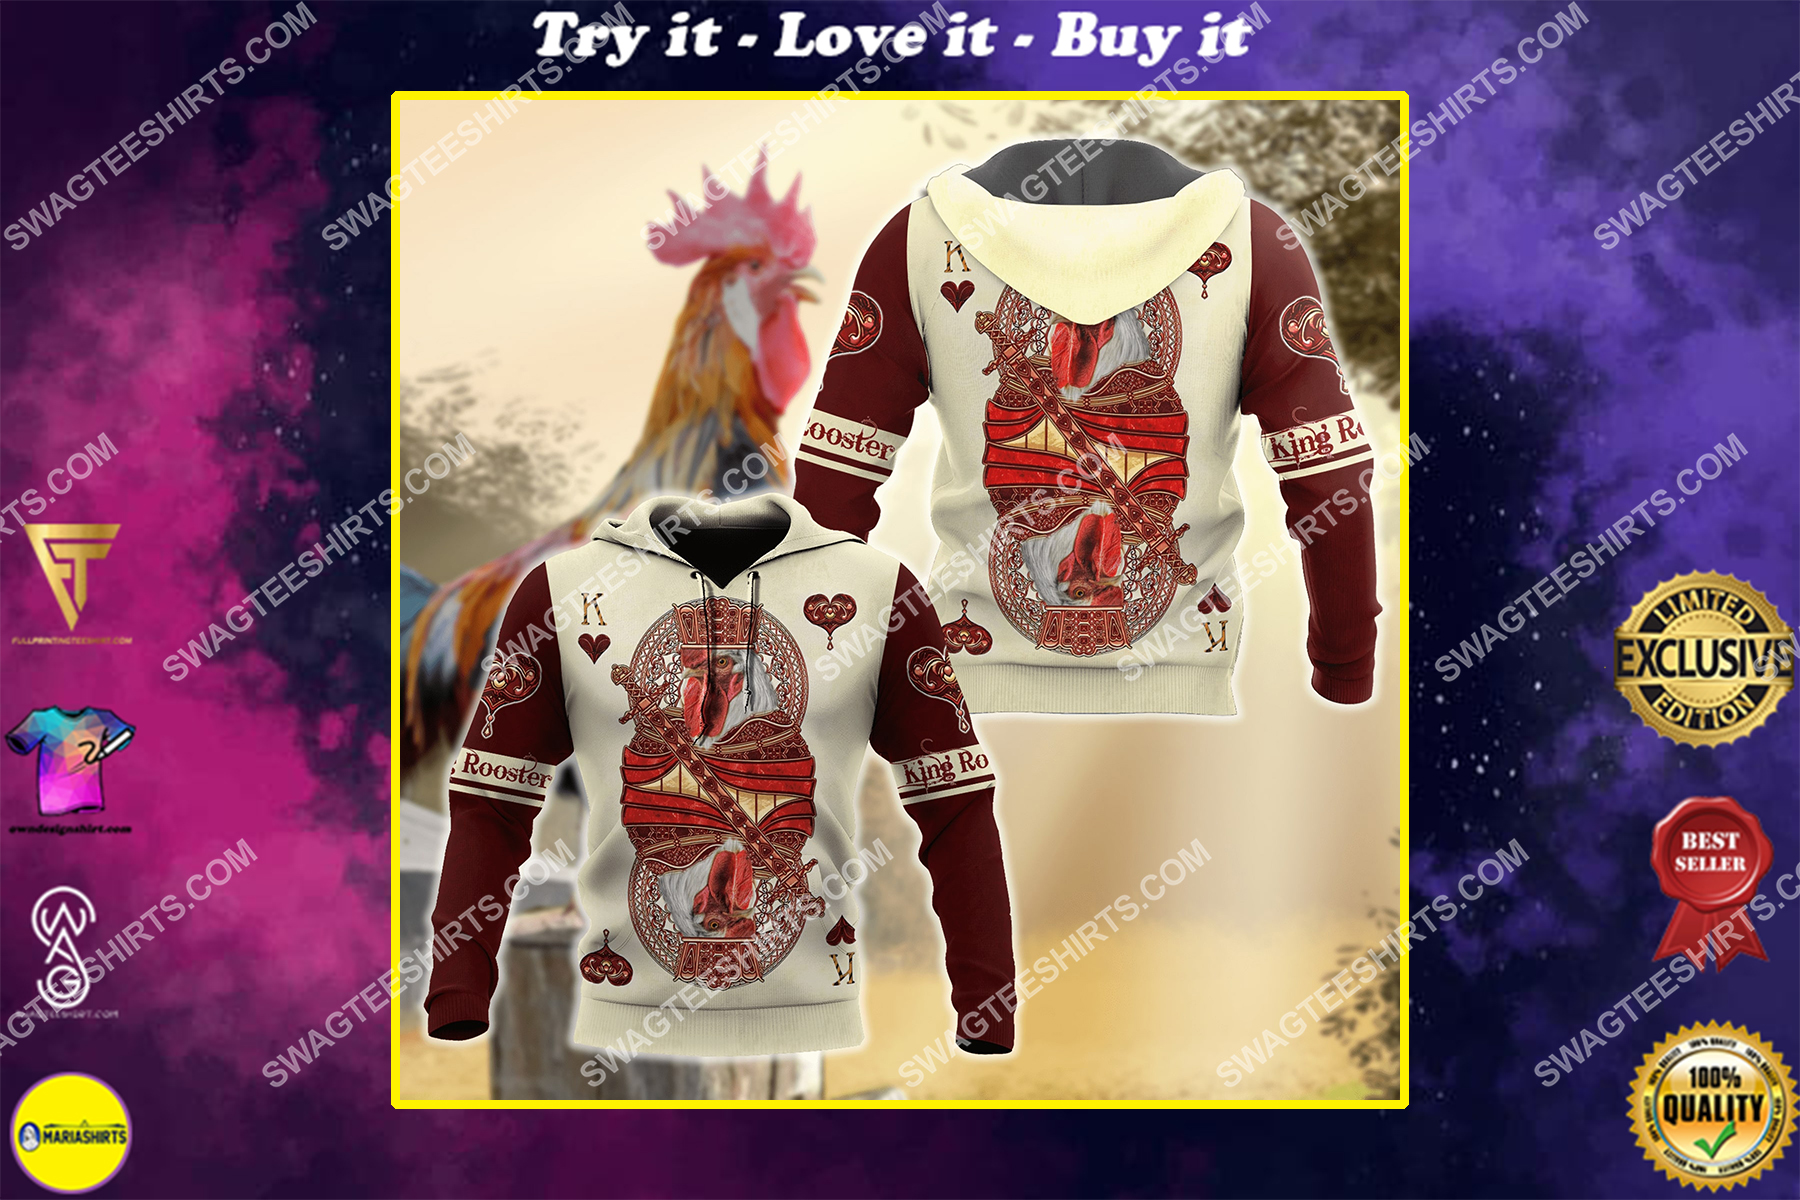 the king poker rooster chicken full printing shirt 1